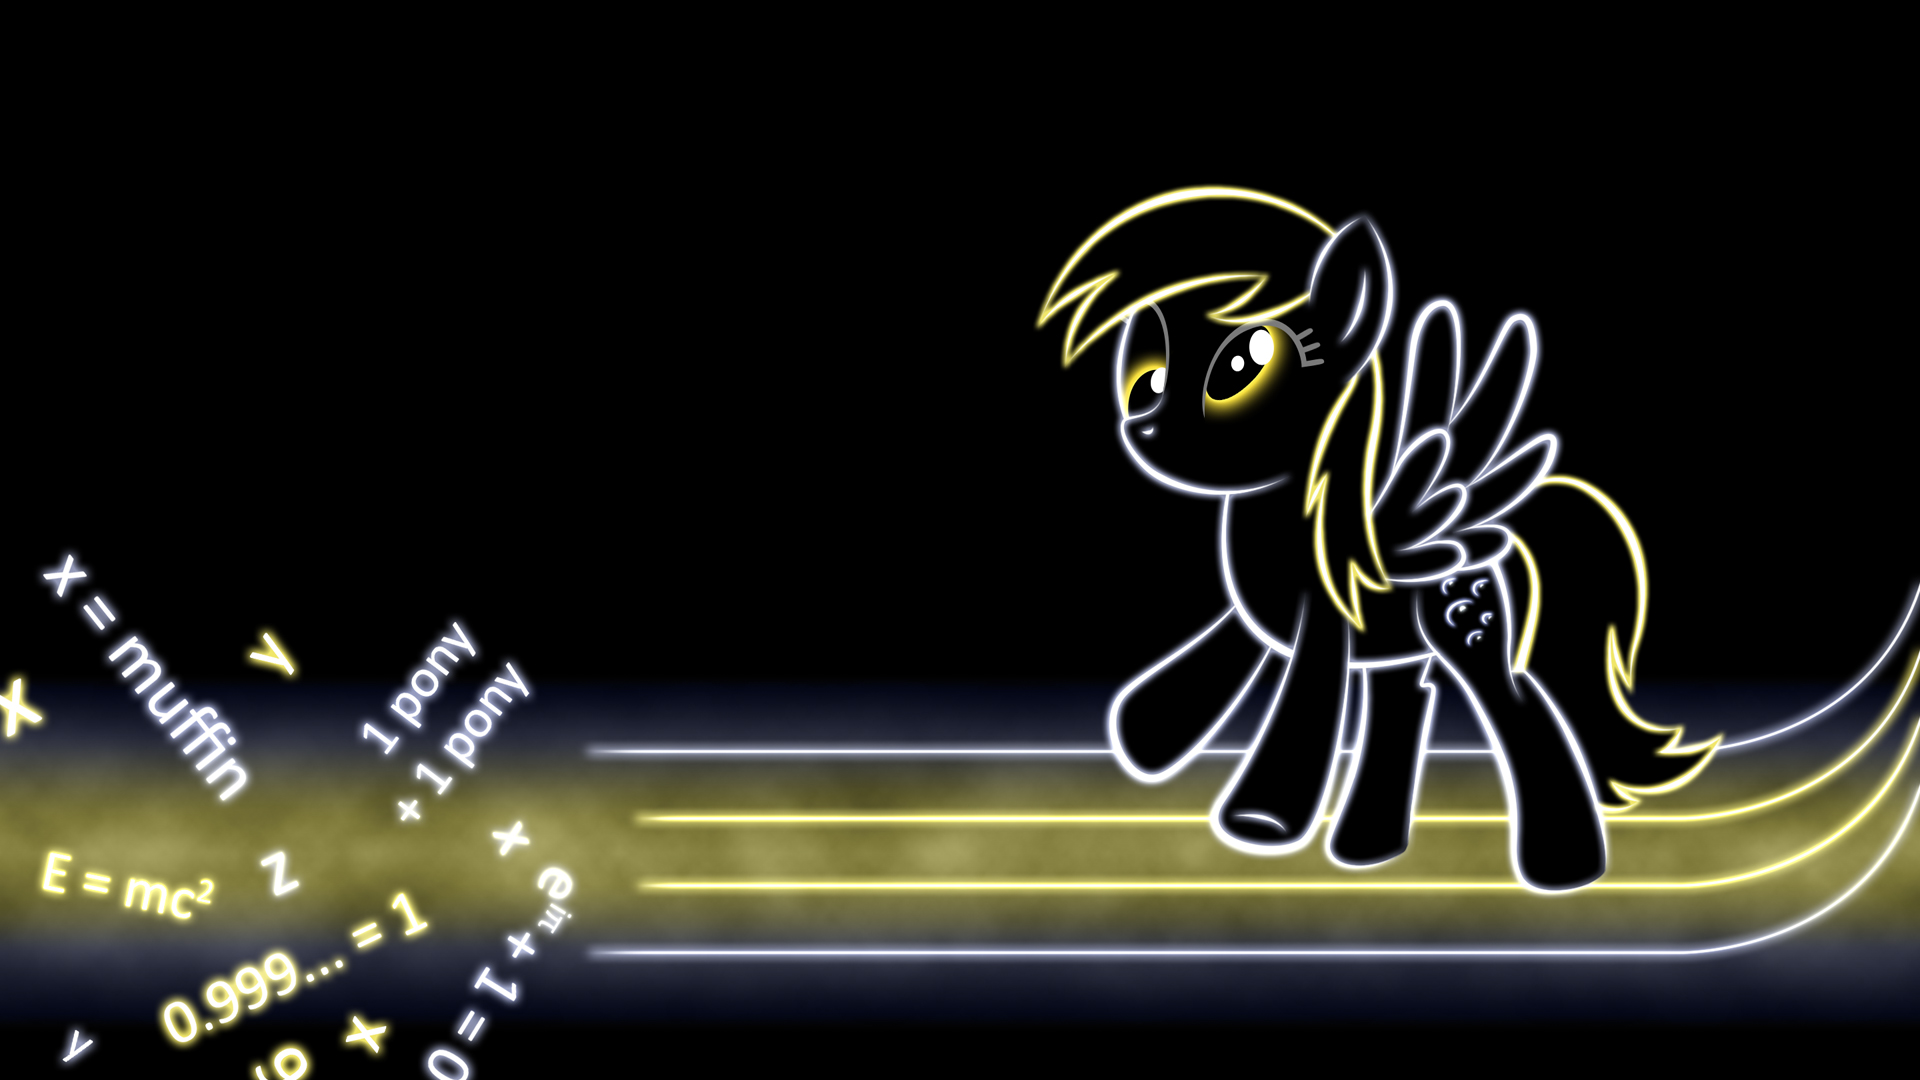 Derpy Hooves My Little Pony 1920x1080